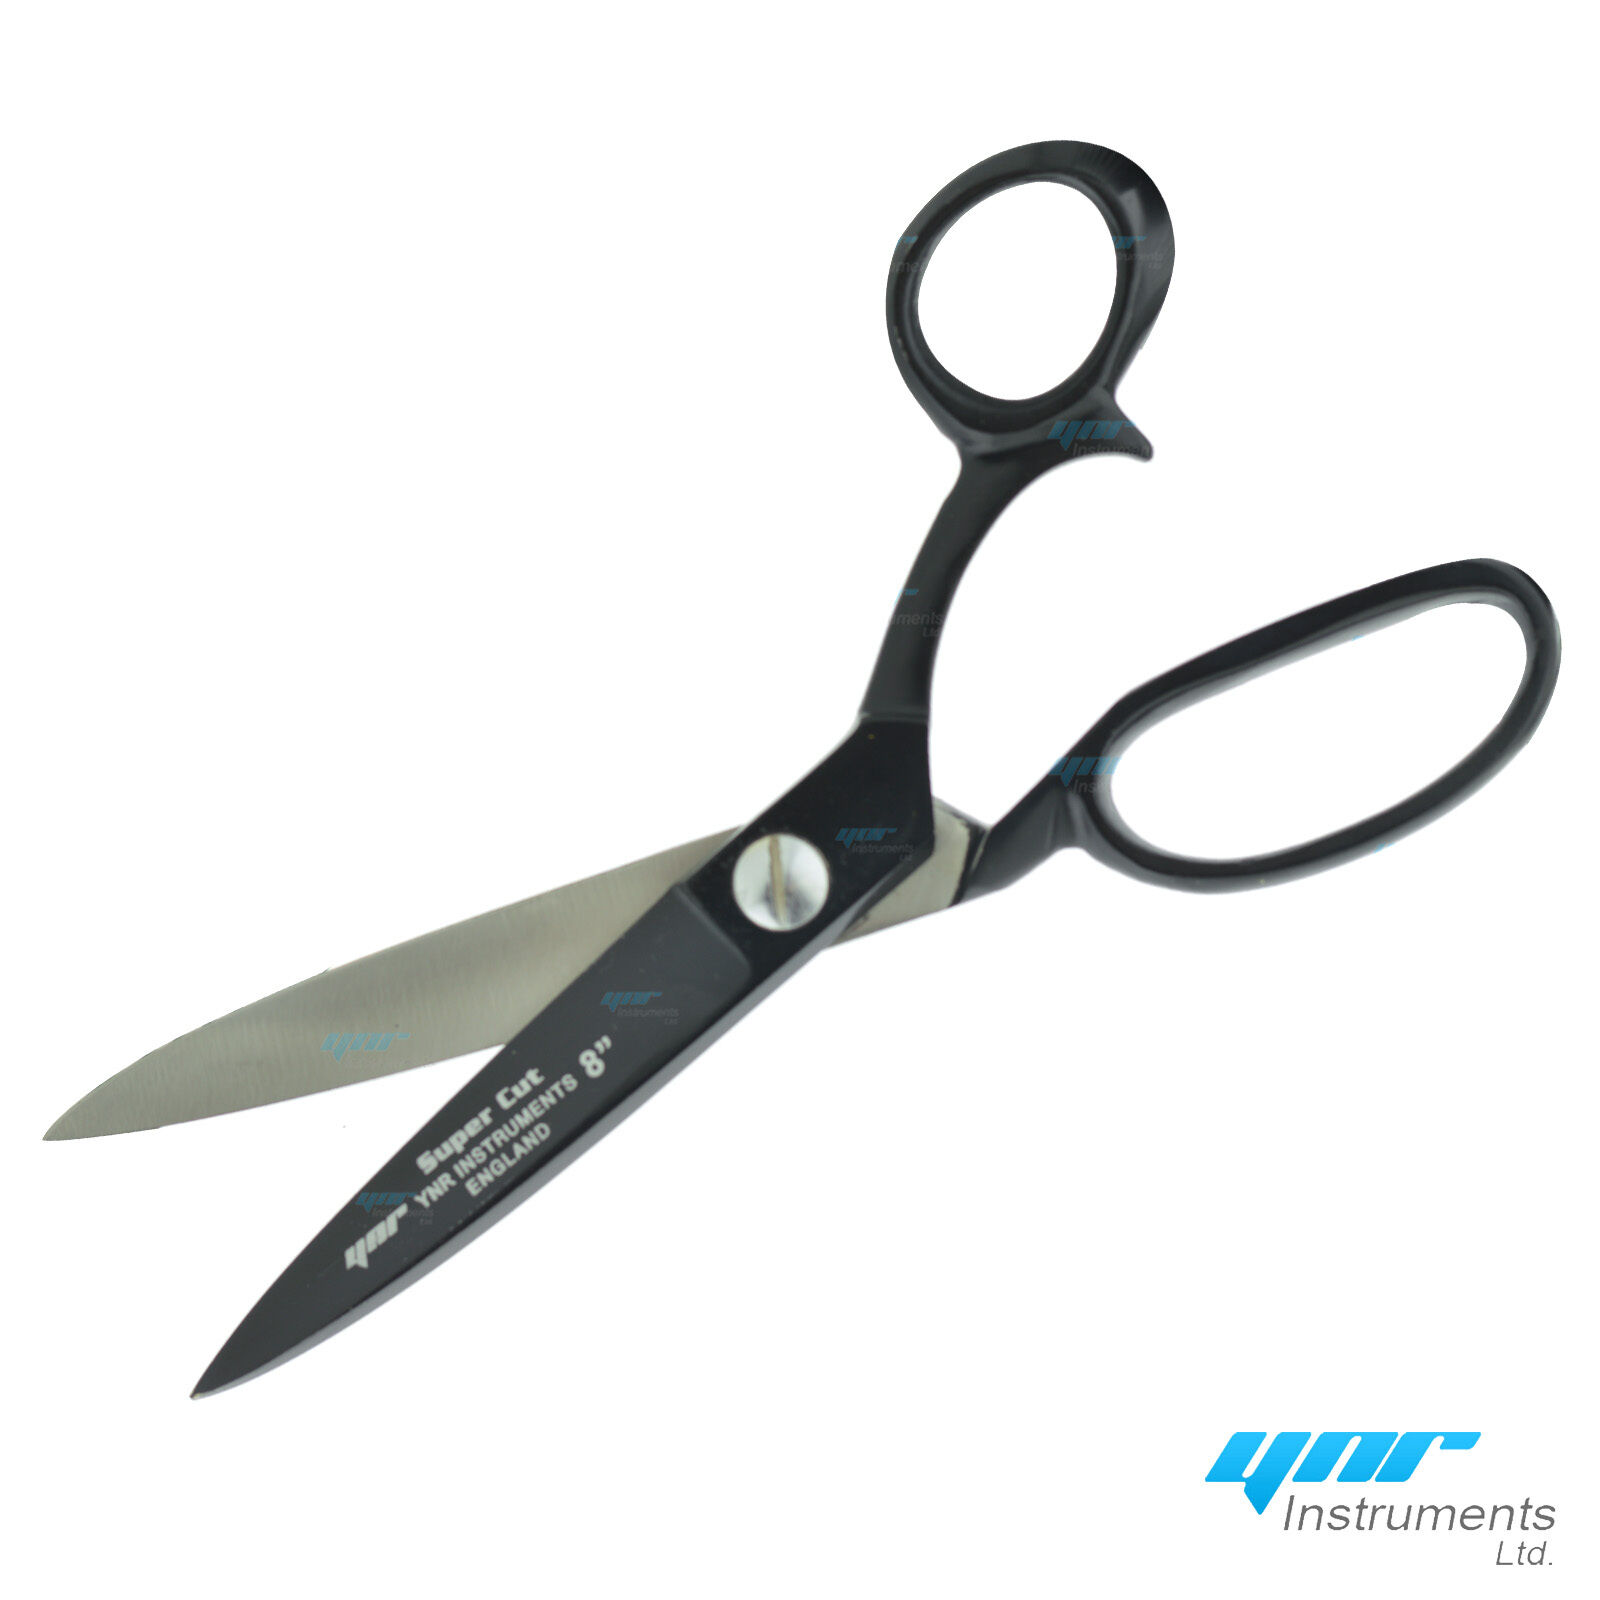 YNR Tailor Scissors Dressmaking Quality Upholstery Fabric Cutters Shears Black